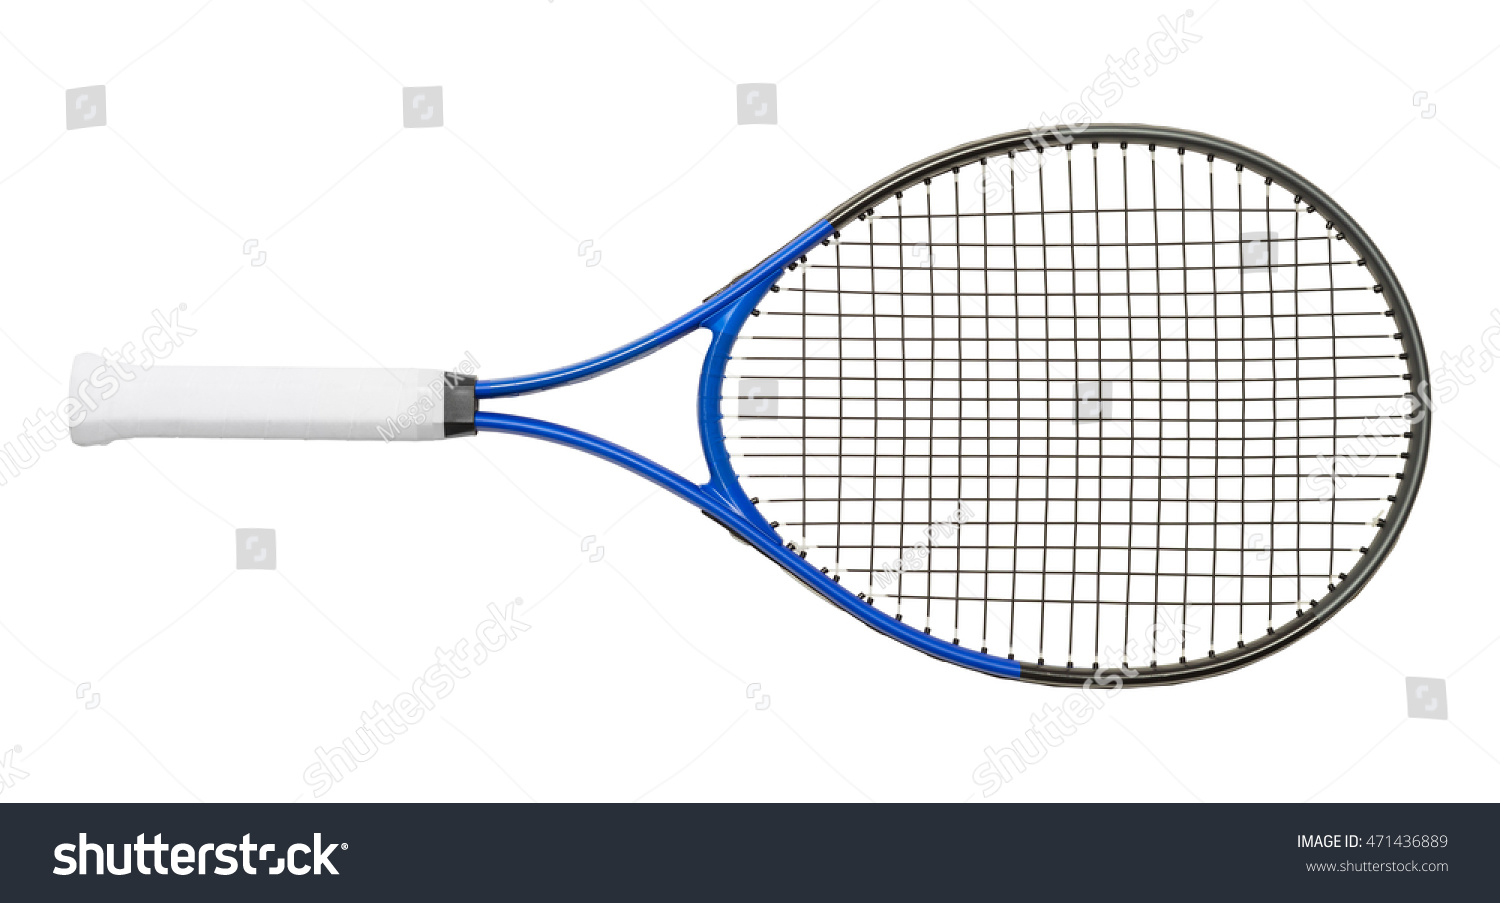 New Tennis Racket Isolated on White Background. #471436889